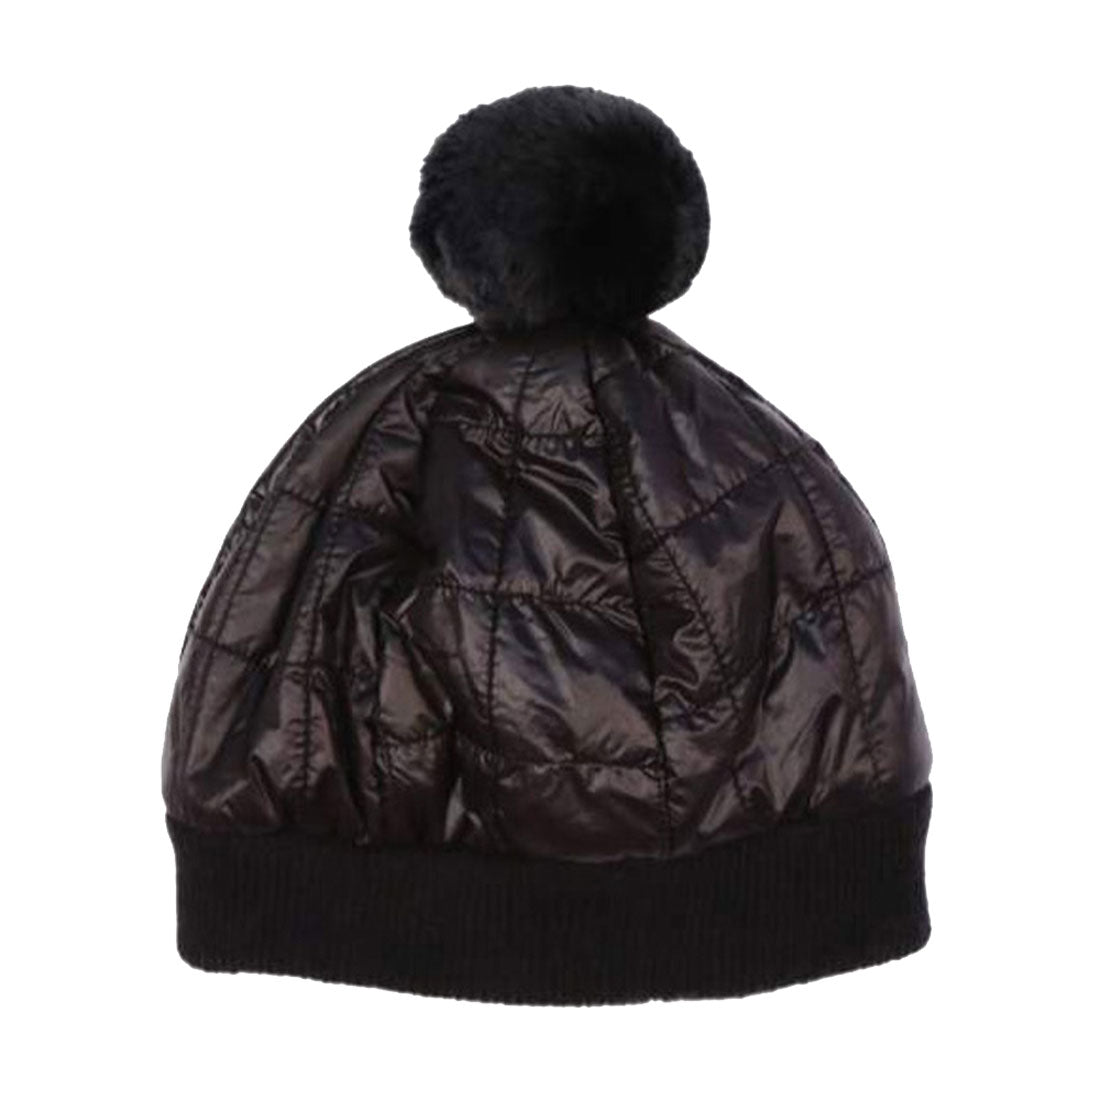 Black One Size Padded Beanie Hats. Before running out the door into the cool air, you’ll want to reach for these toasty beanie to keep your hands incredibly warm. Accessorize the fun way with these beanie, it's the autumnal touch you need to finish your outfit in style. Awesome winter gift accessory!